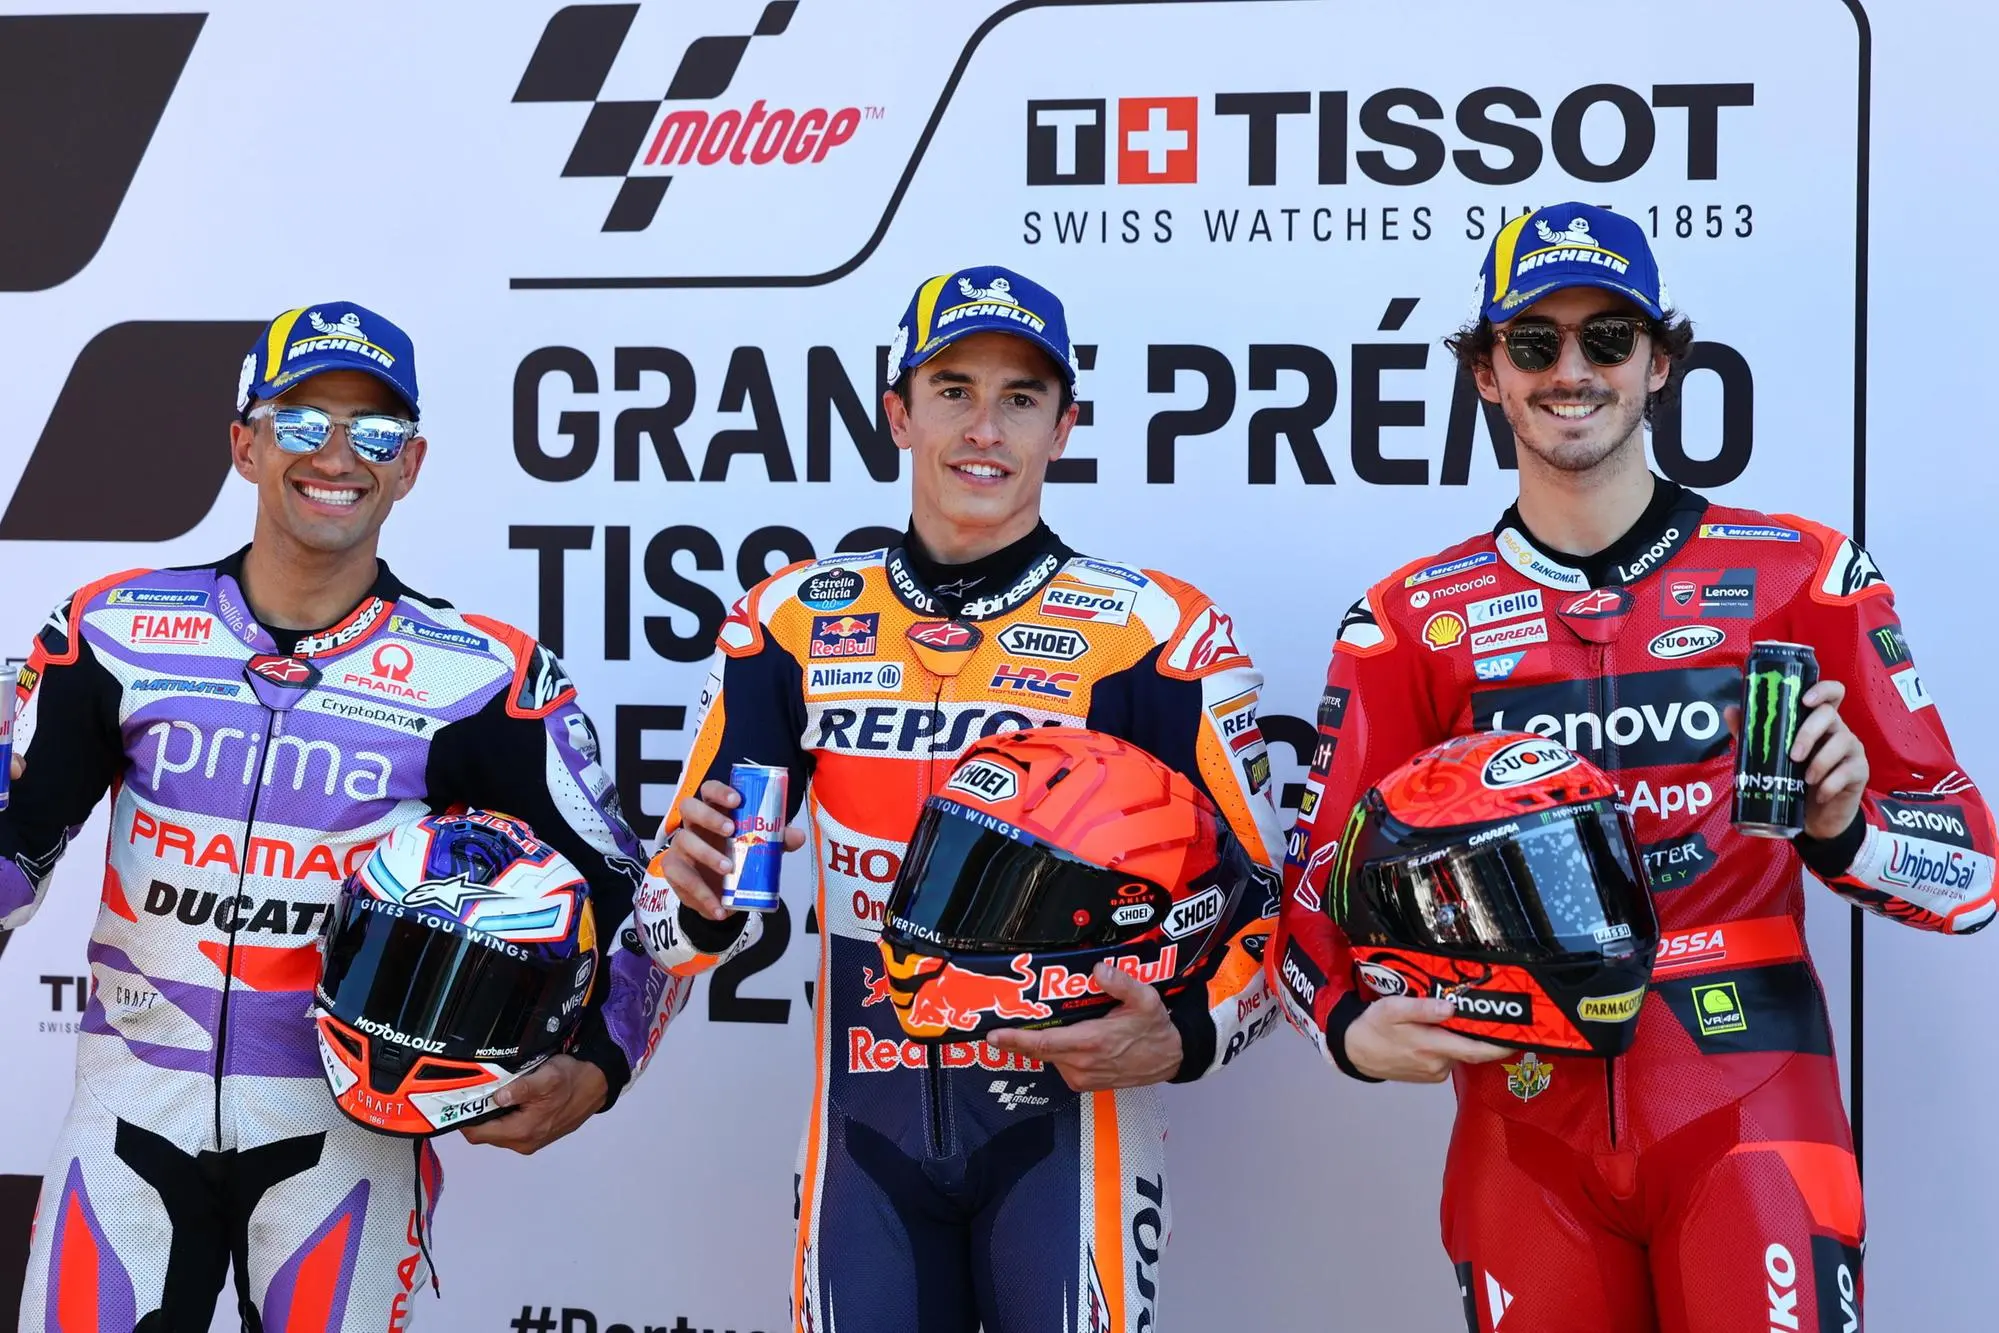 epa10542446 Spanish MotoGP rider Marc Marquez of Repsol Honda Team (C) celebrates taking pole position with second placed Italian MotoGP rider Francesco Bagnaia (R) of Ducati Lenovo Team and third placed Spanish MotoGP rider Jorge Martin (L) of Prima Pramac Racing after the qualifying for the Motorcycling Grand Prix of Portugal at Algarve International race track, Portimao, Portugal, 25 March 2023. The Motorcycling Grand Prix of Portugal will take place on 26 March 2023. EPA/NUNO VEIGA